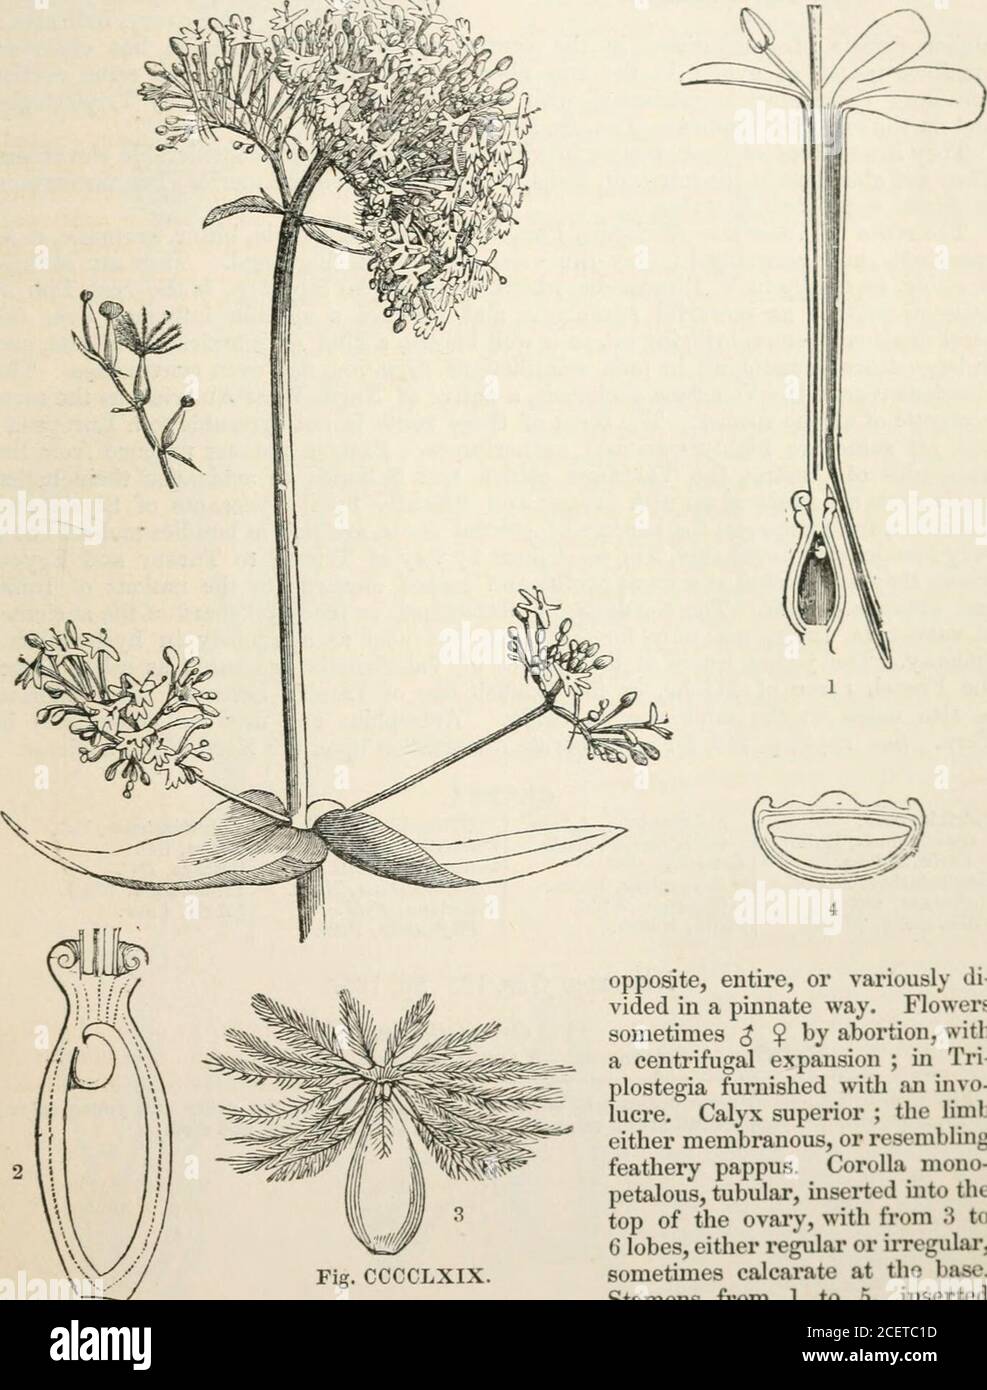 . The vegetable kingdom : or, The structure, classification, and uses of plants, illustrated upon the natural system. opsis, Sonder. GENERA. Levenhookia, R. Br. Gynocampus, Lesch.Forstera, Linn. f. Phyllachne, Forst.Stibas, Commers. Numbers. Gen. 5. Sp. 121.Position.—Lobeliacese.—Stylidiace^.—Goodeniacese. Fig. CCCCLXVII.—stylidium calcaratum.—25. Bauerthe column ; 2. capsule split open ; 3. seed. Fig. CCCCLXVIIL—Forstera clavigera.—//oo/fec//. 1, the epigynous gland 1. anthers and stigma, forming the point of Campanales.J VALERIANACE.E. 69; Order CCLXX. VALERIANACE^.—Valerianworts. Valerianea Stock Photo